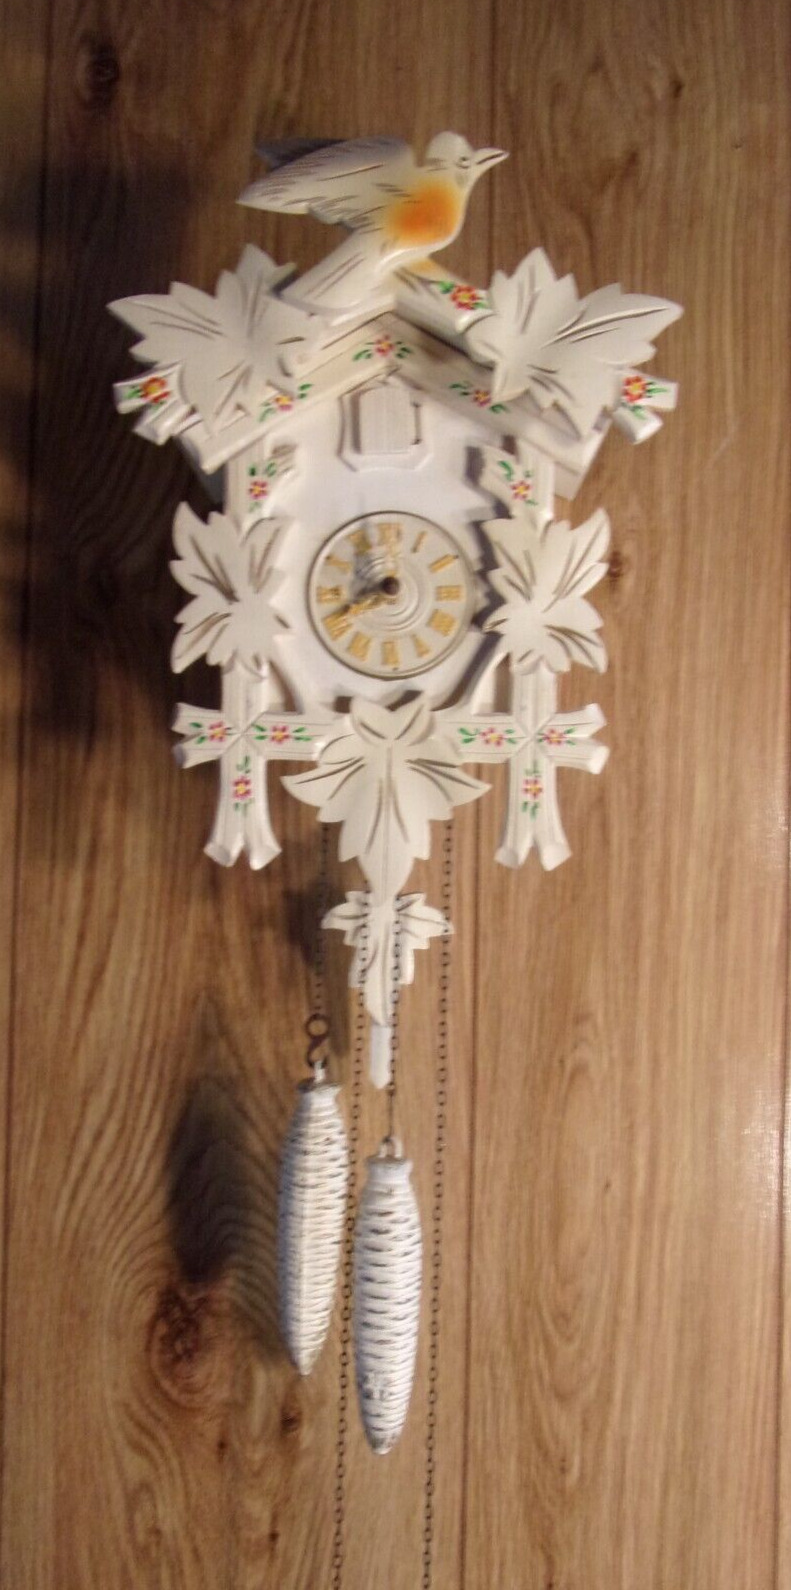 Vintage Antique White Black Forest Cuckoo Clock W. Germany - Complete & Working